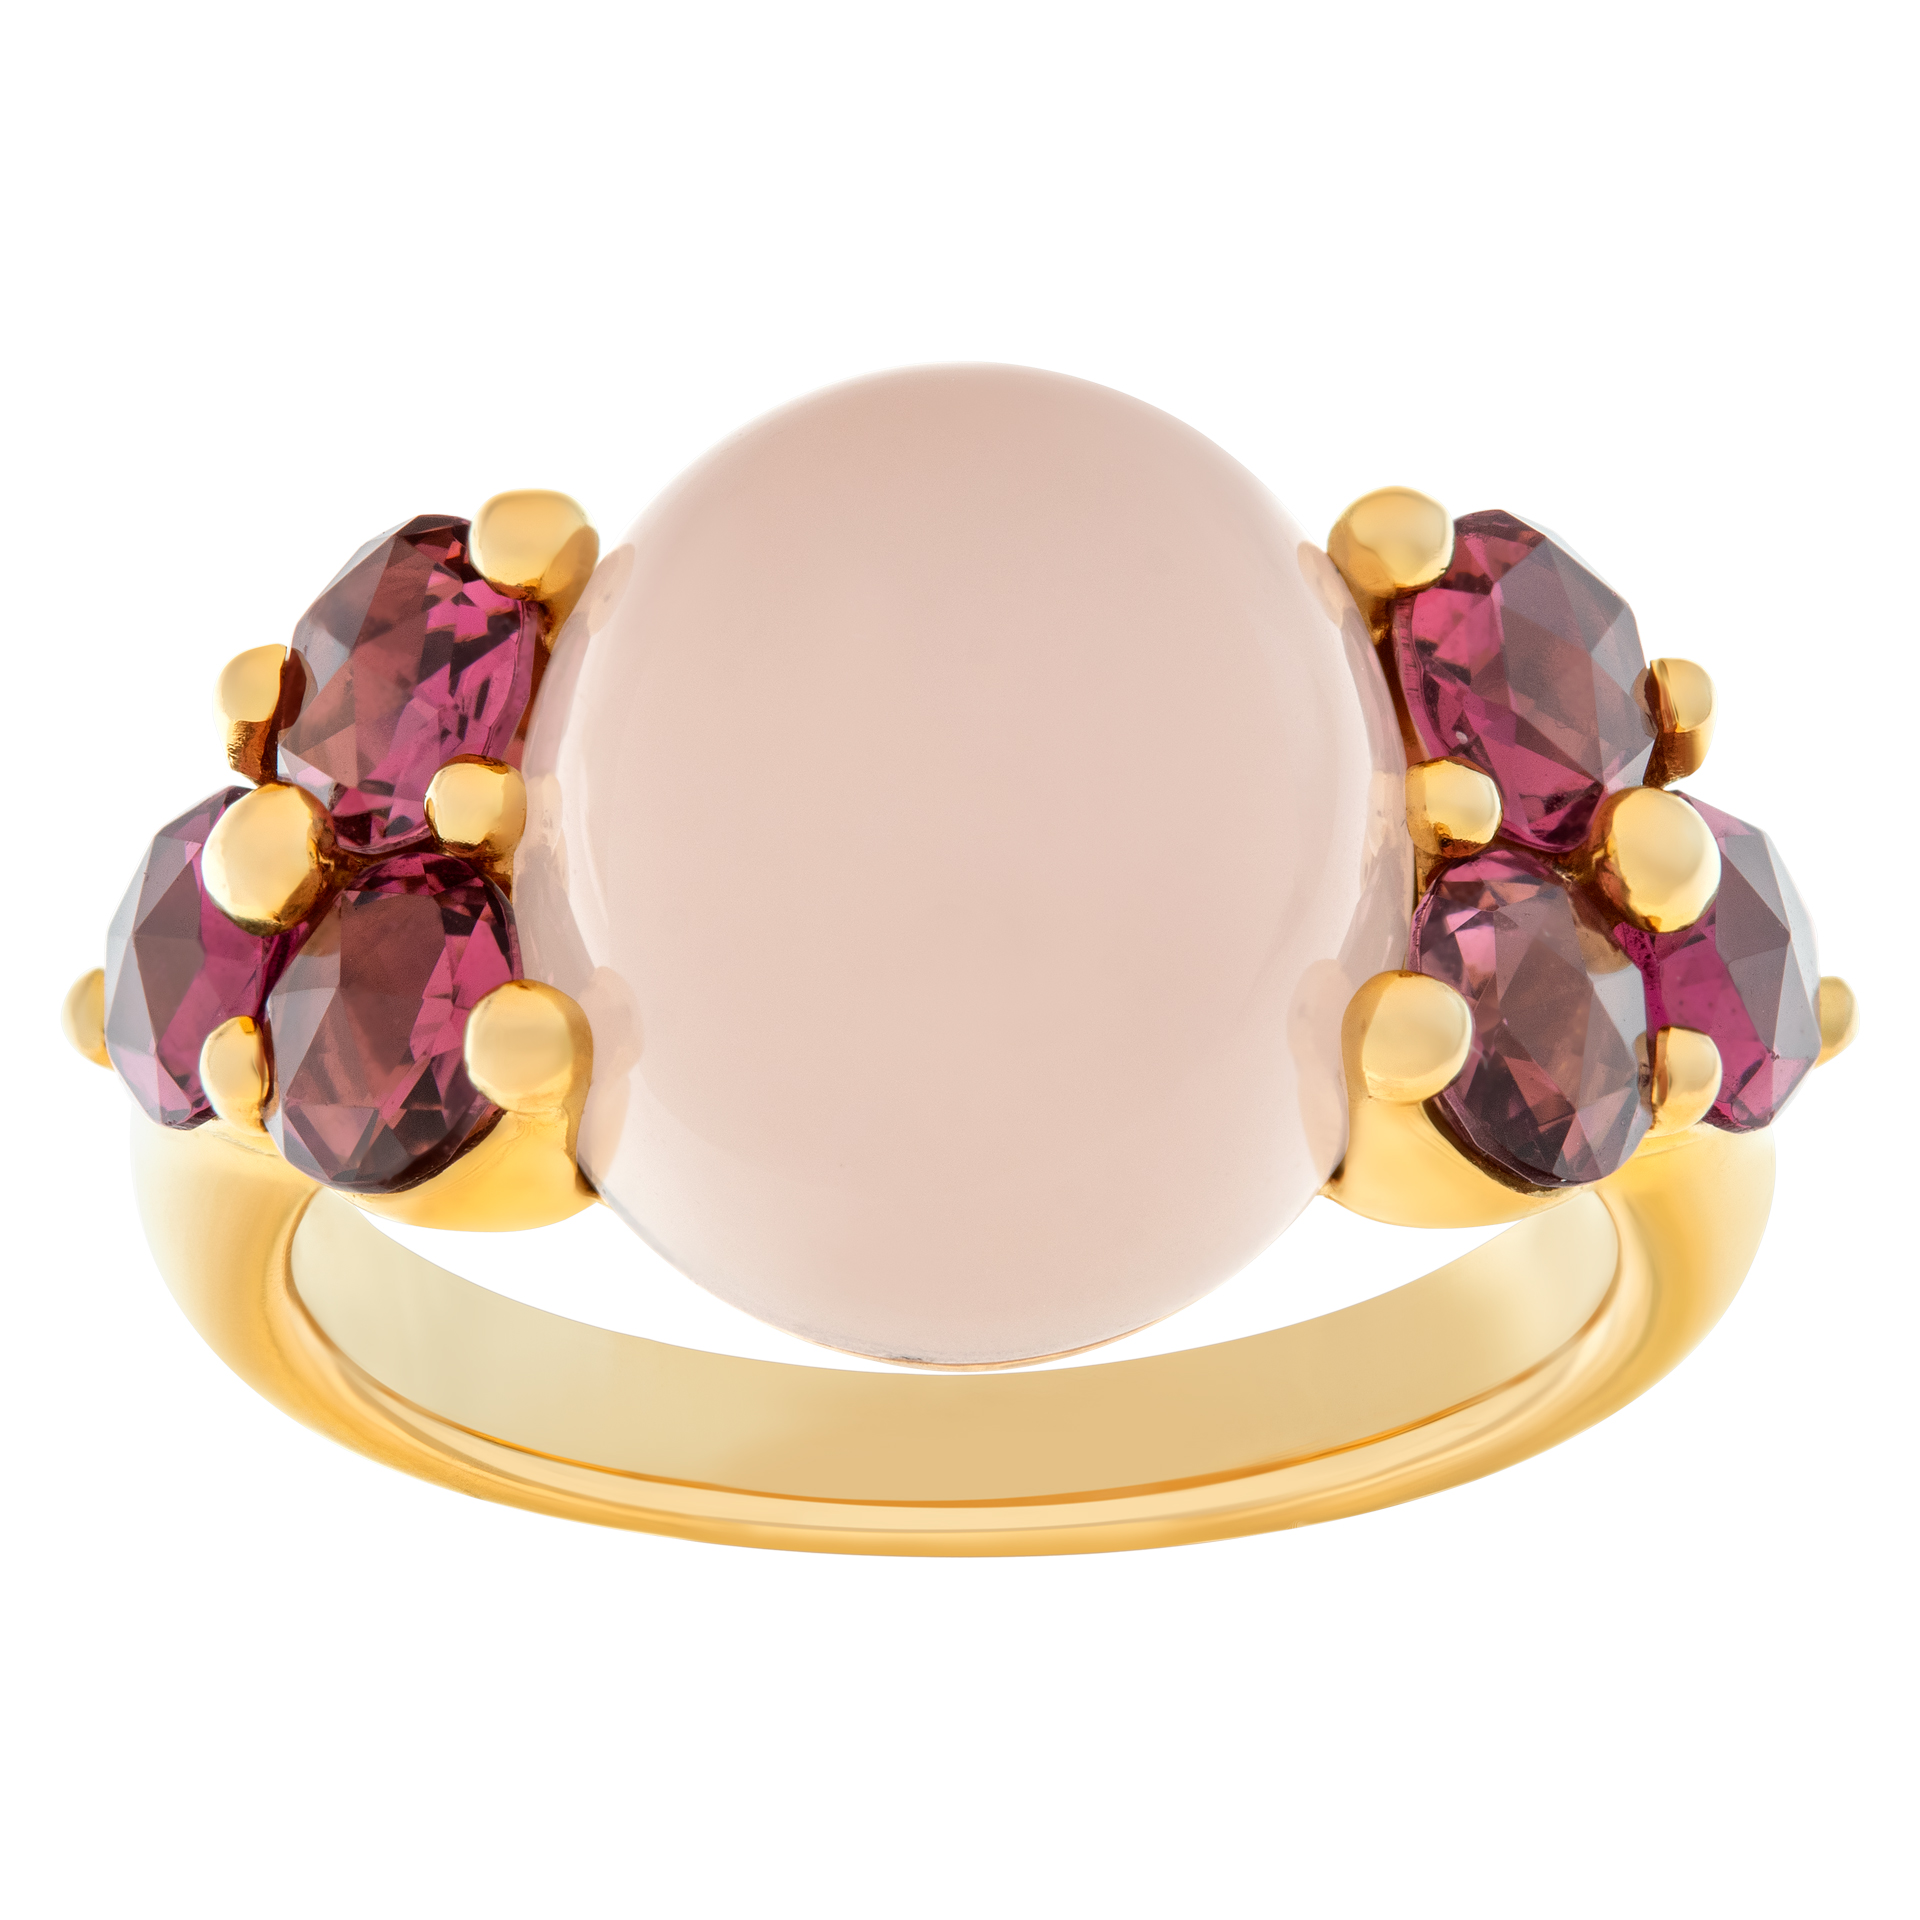 Pomellato Luna ring in 18k rose gold with cabochon rose quartz and side pink tourmaline image 1